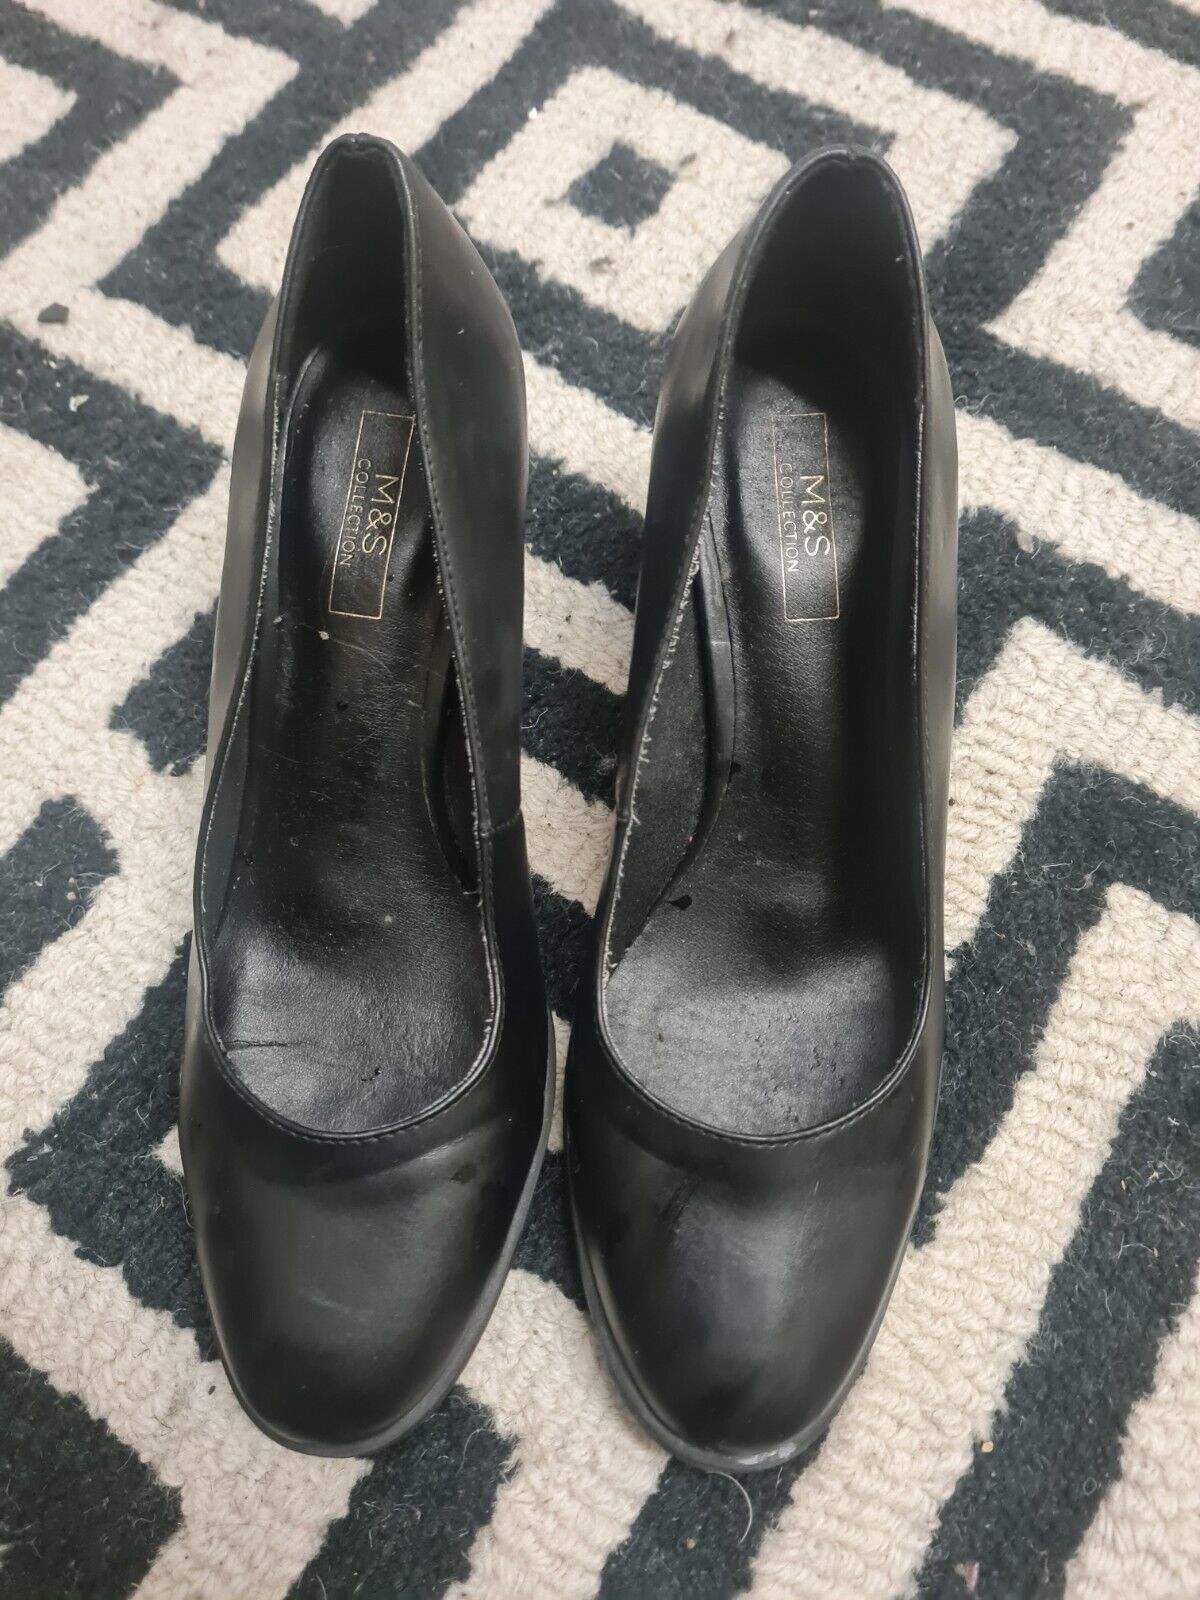 Primary image for marks and Spencer Black Block Heel  Court Shoes Size 8(uk)